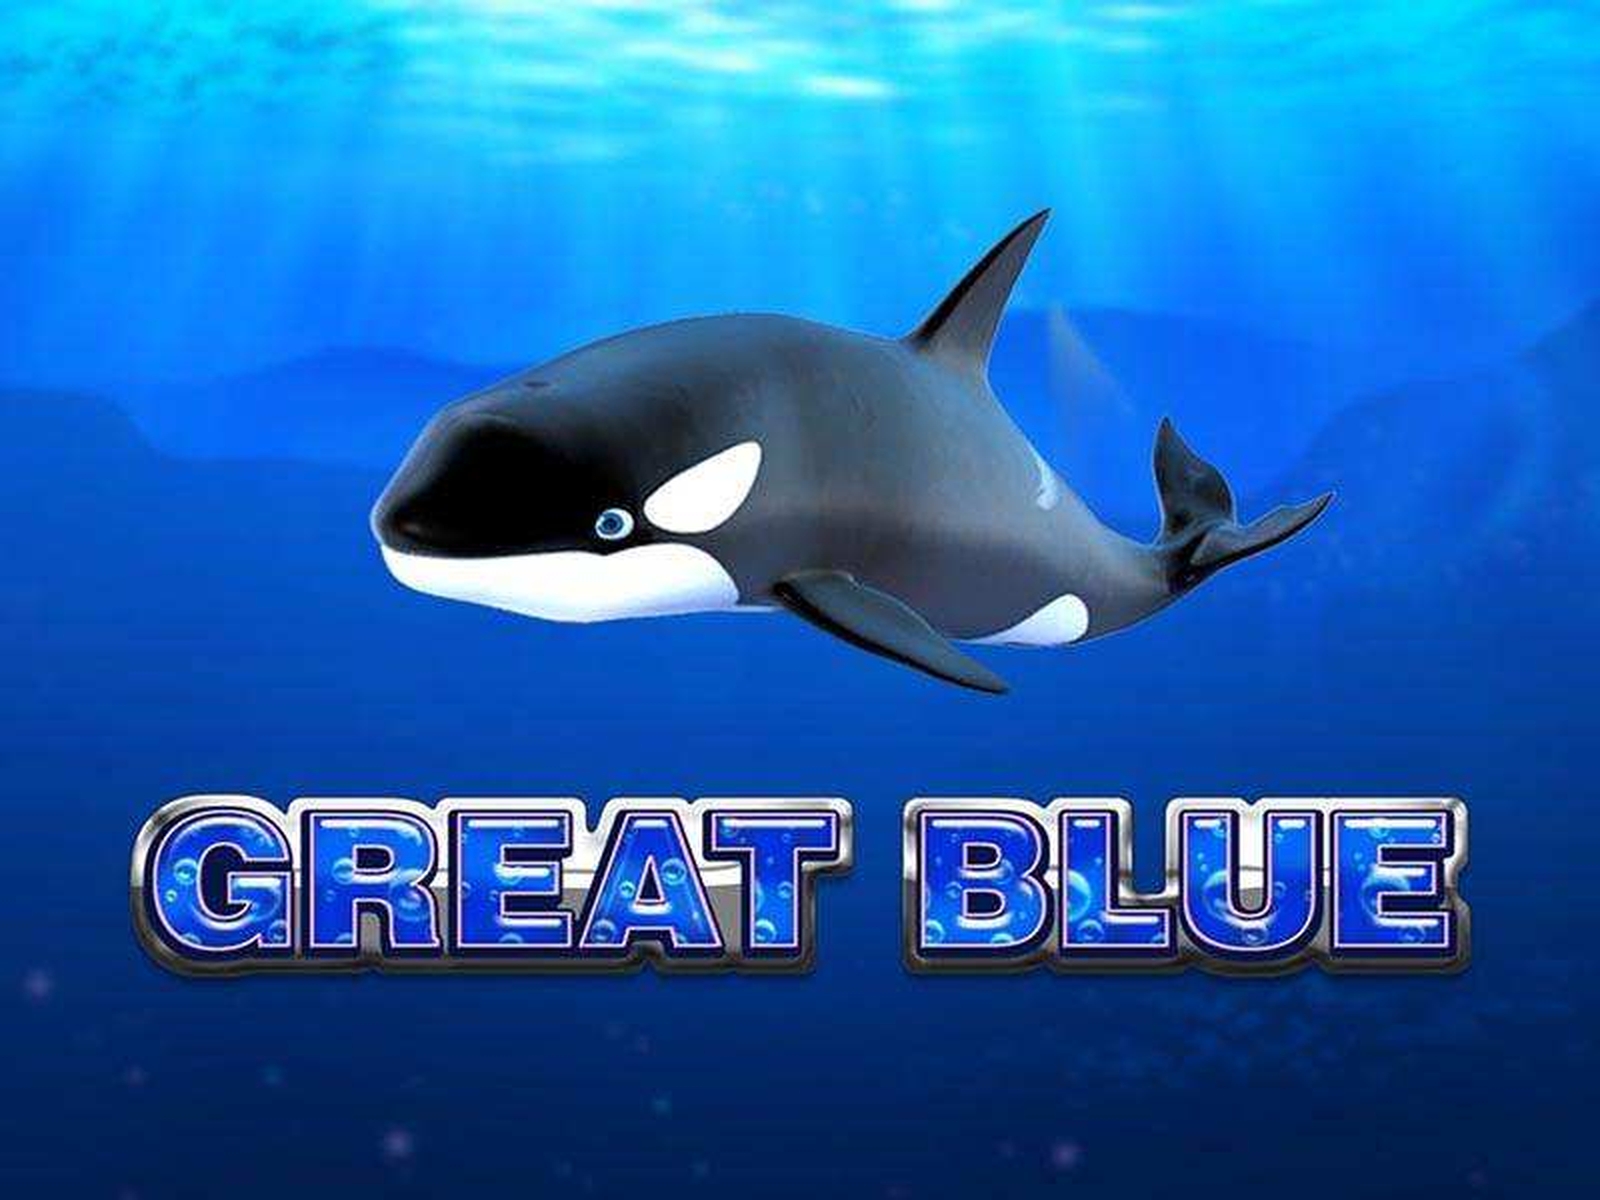 The Great Blue Online Slot Demo Game by Playtech